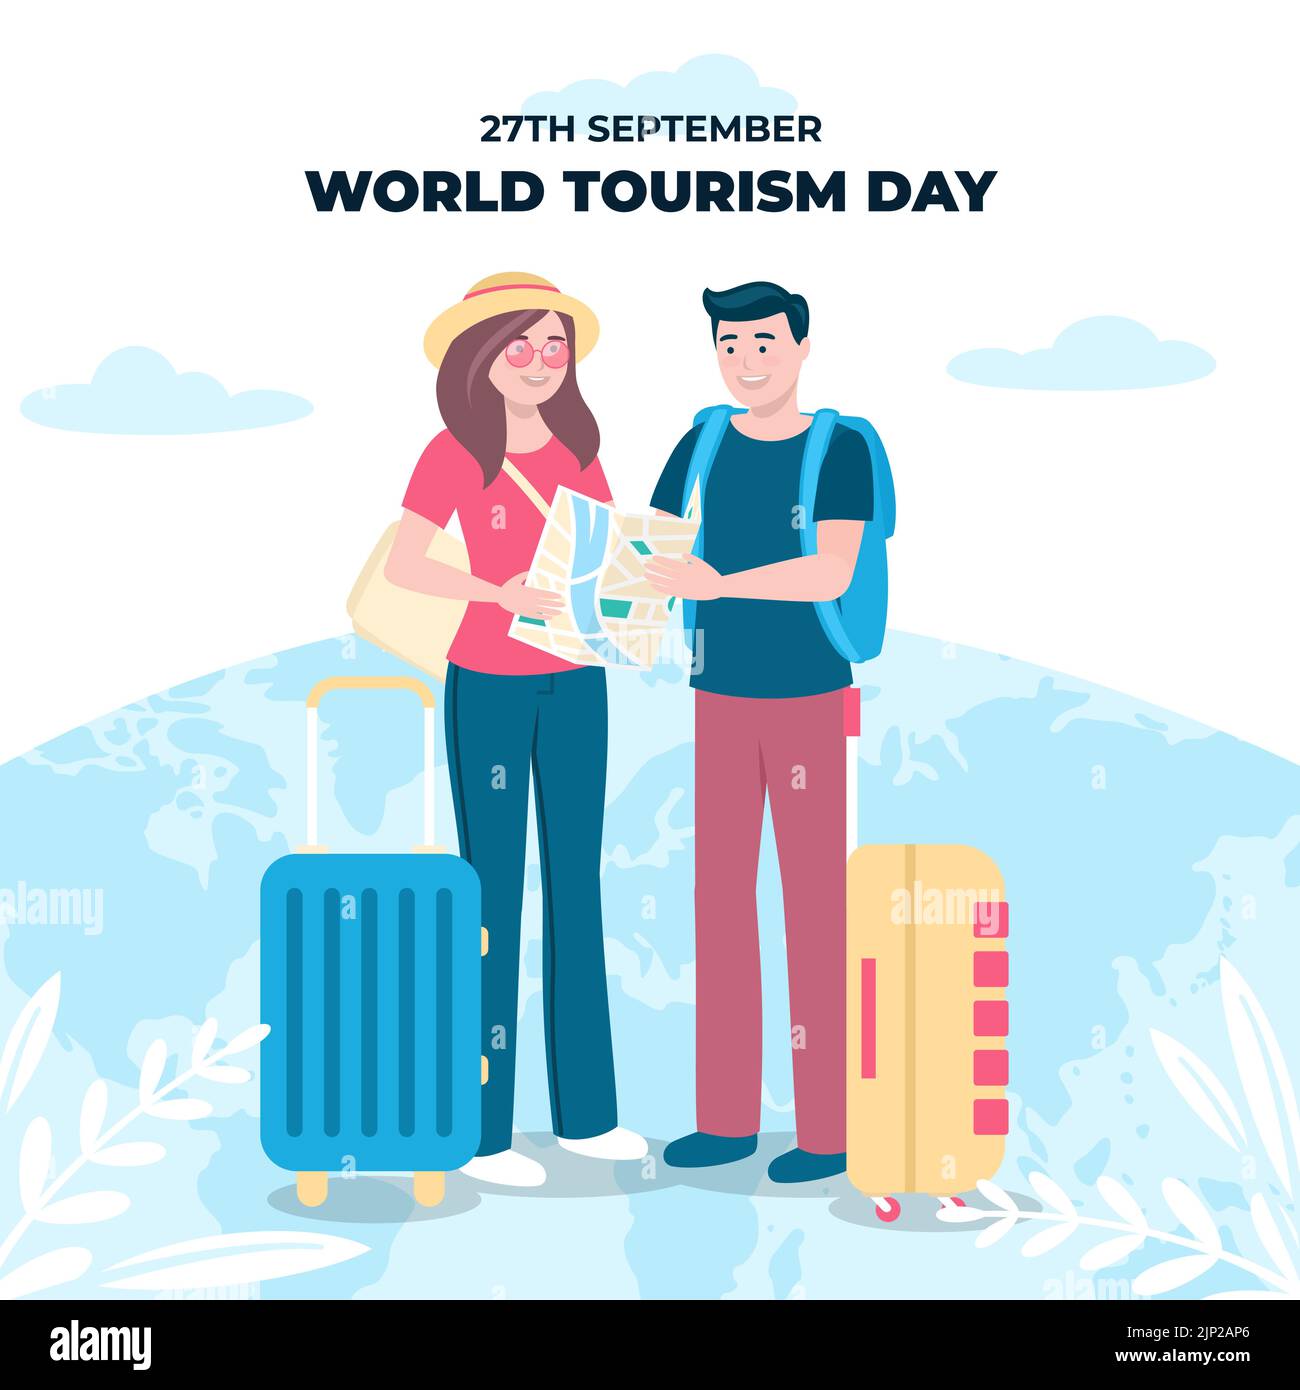 Flat illustration for world tourism day celebration, a girl and a guy are standing and looking at a map Vector illustration Stock Vector